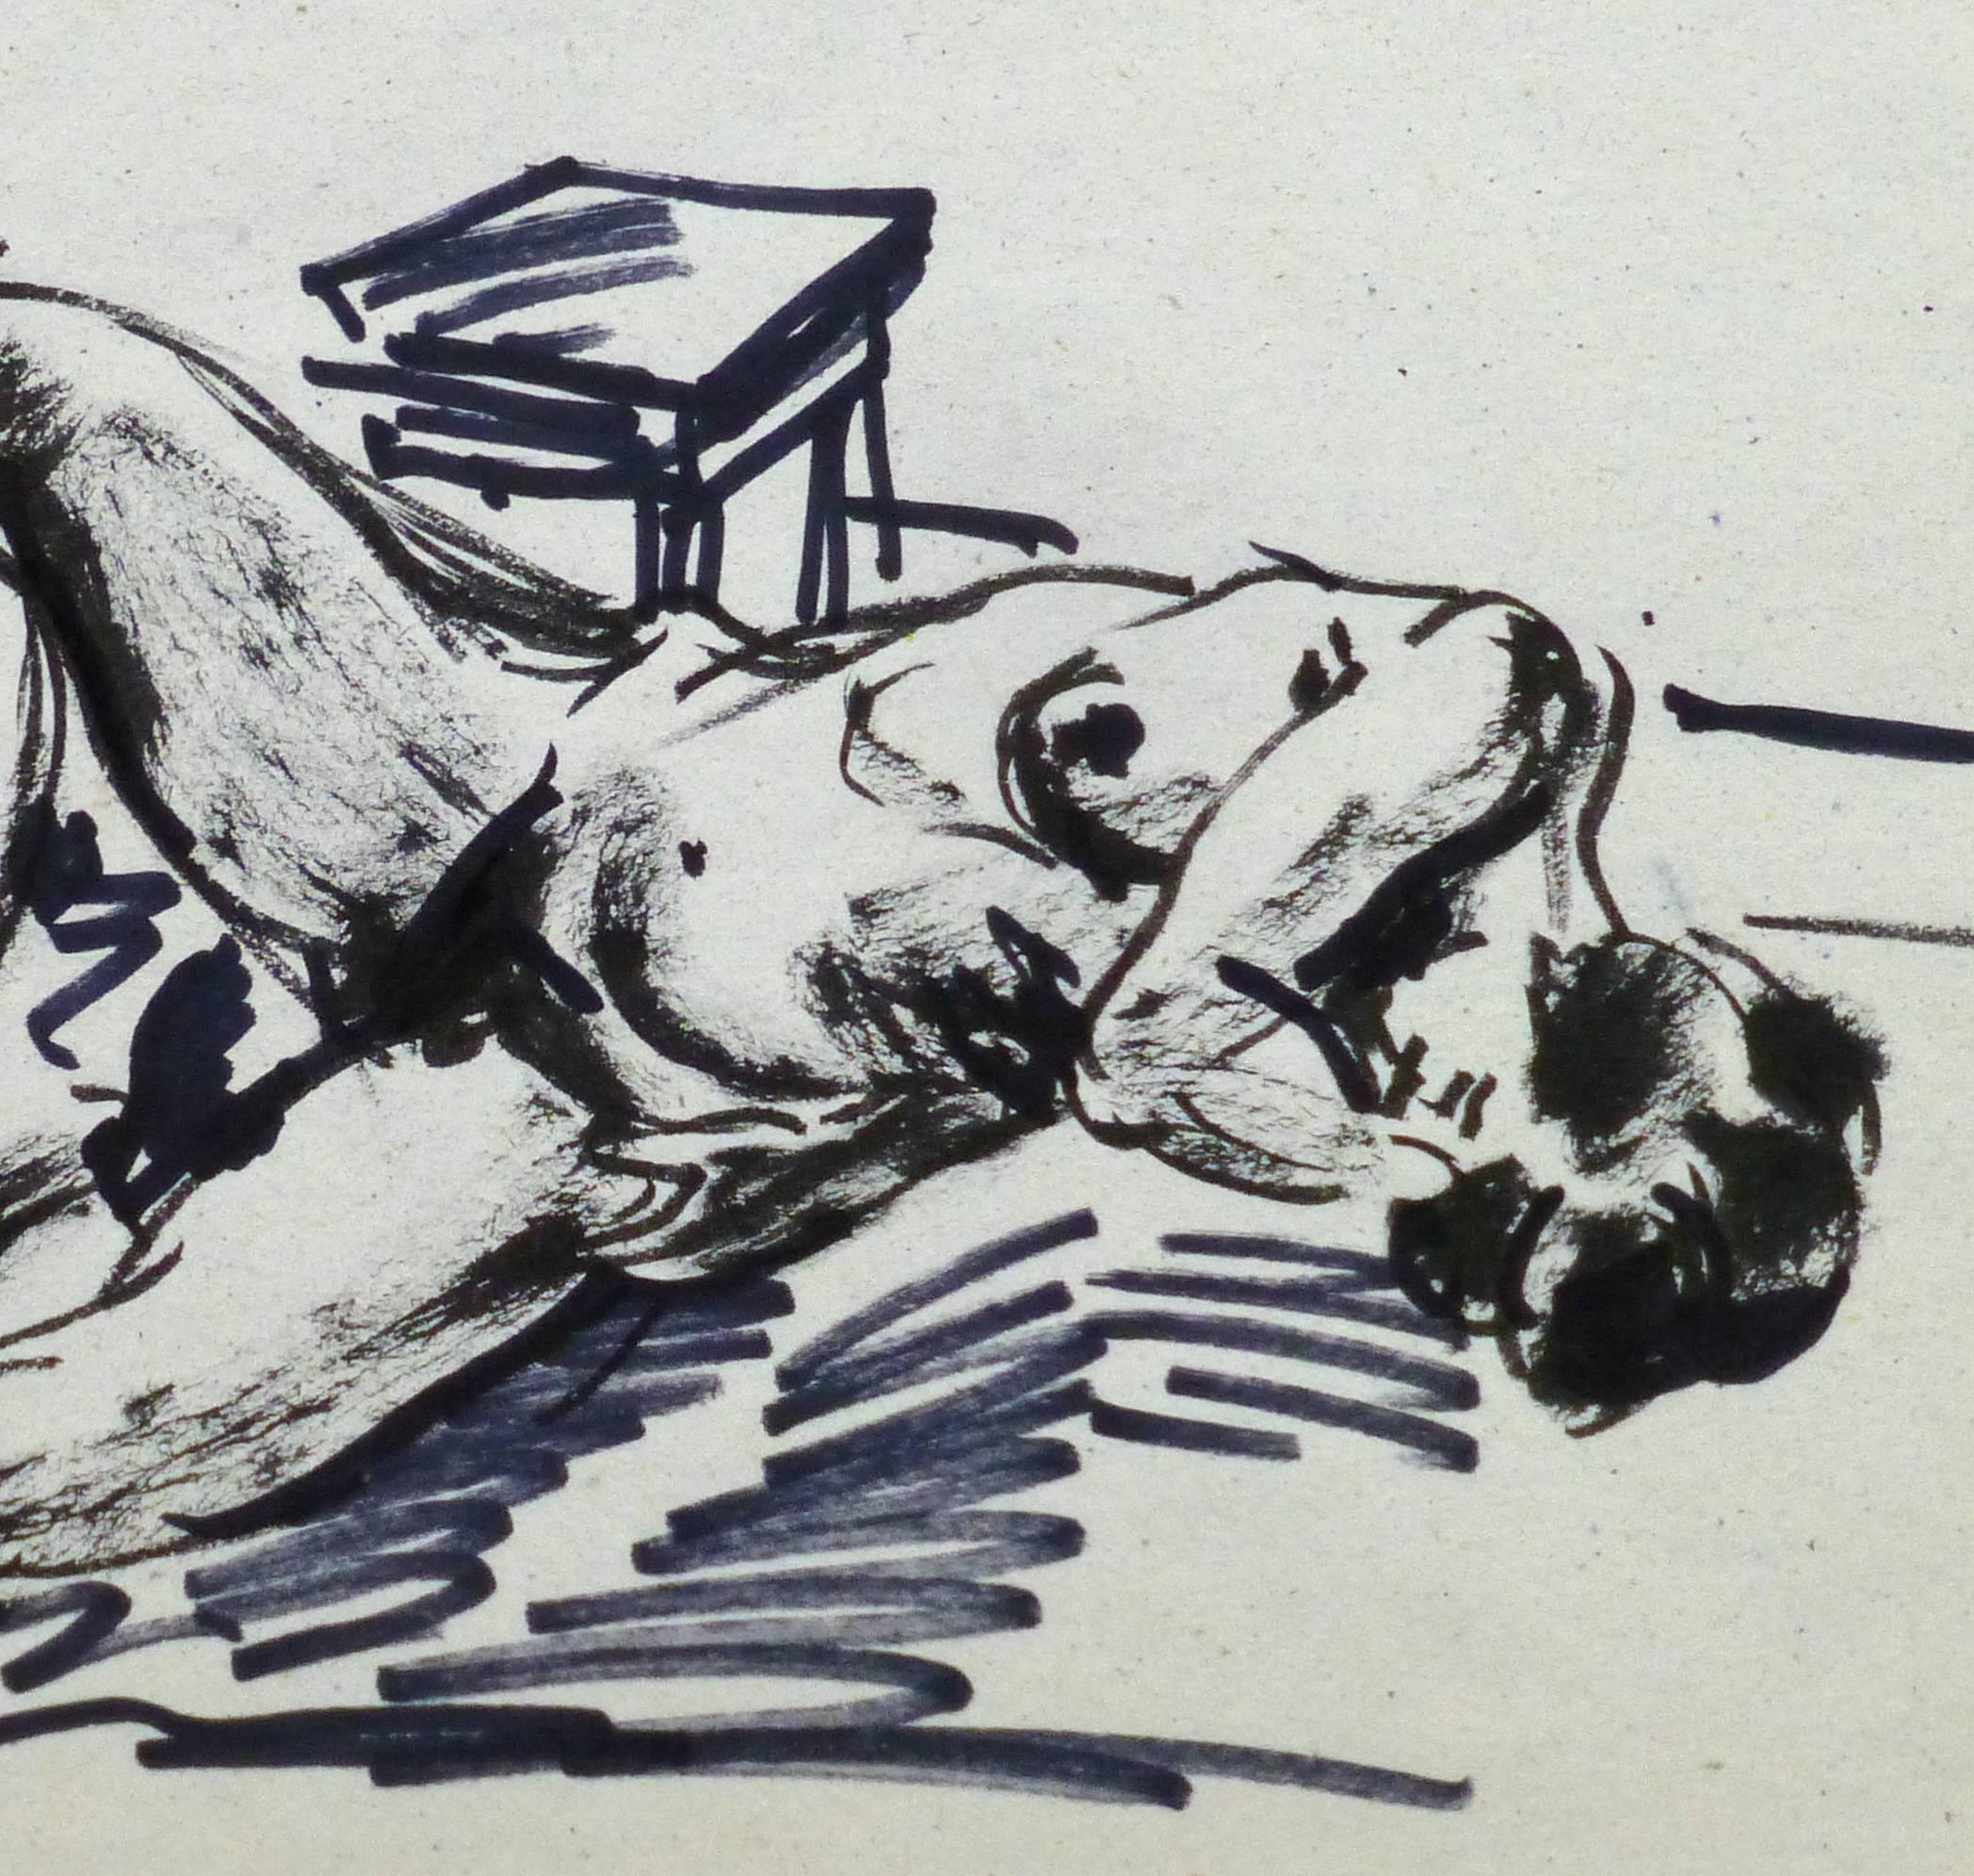 Black and white pen & ink drawing of a nude female model posing for an artist by French artist Jean Baptiste Grancher, circa 1950.

Original artwork on paper displayed on a white mat with a gold border. Archival plastic sleeve and Certificate of